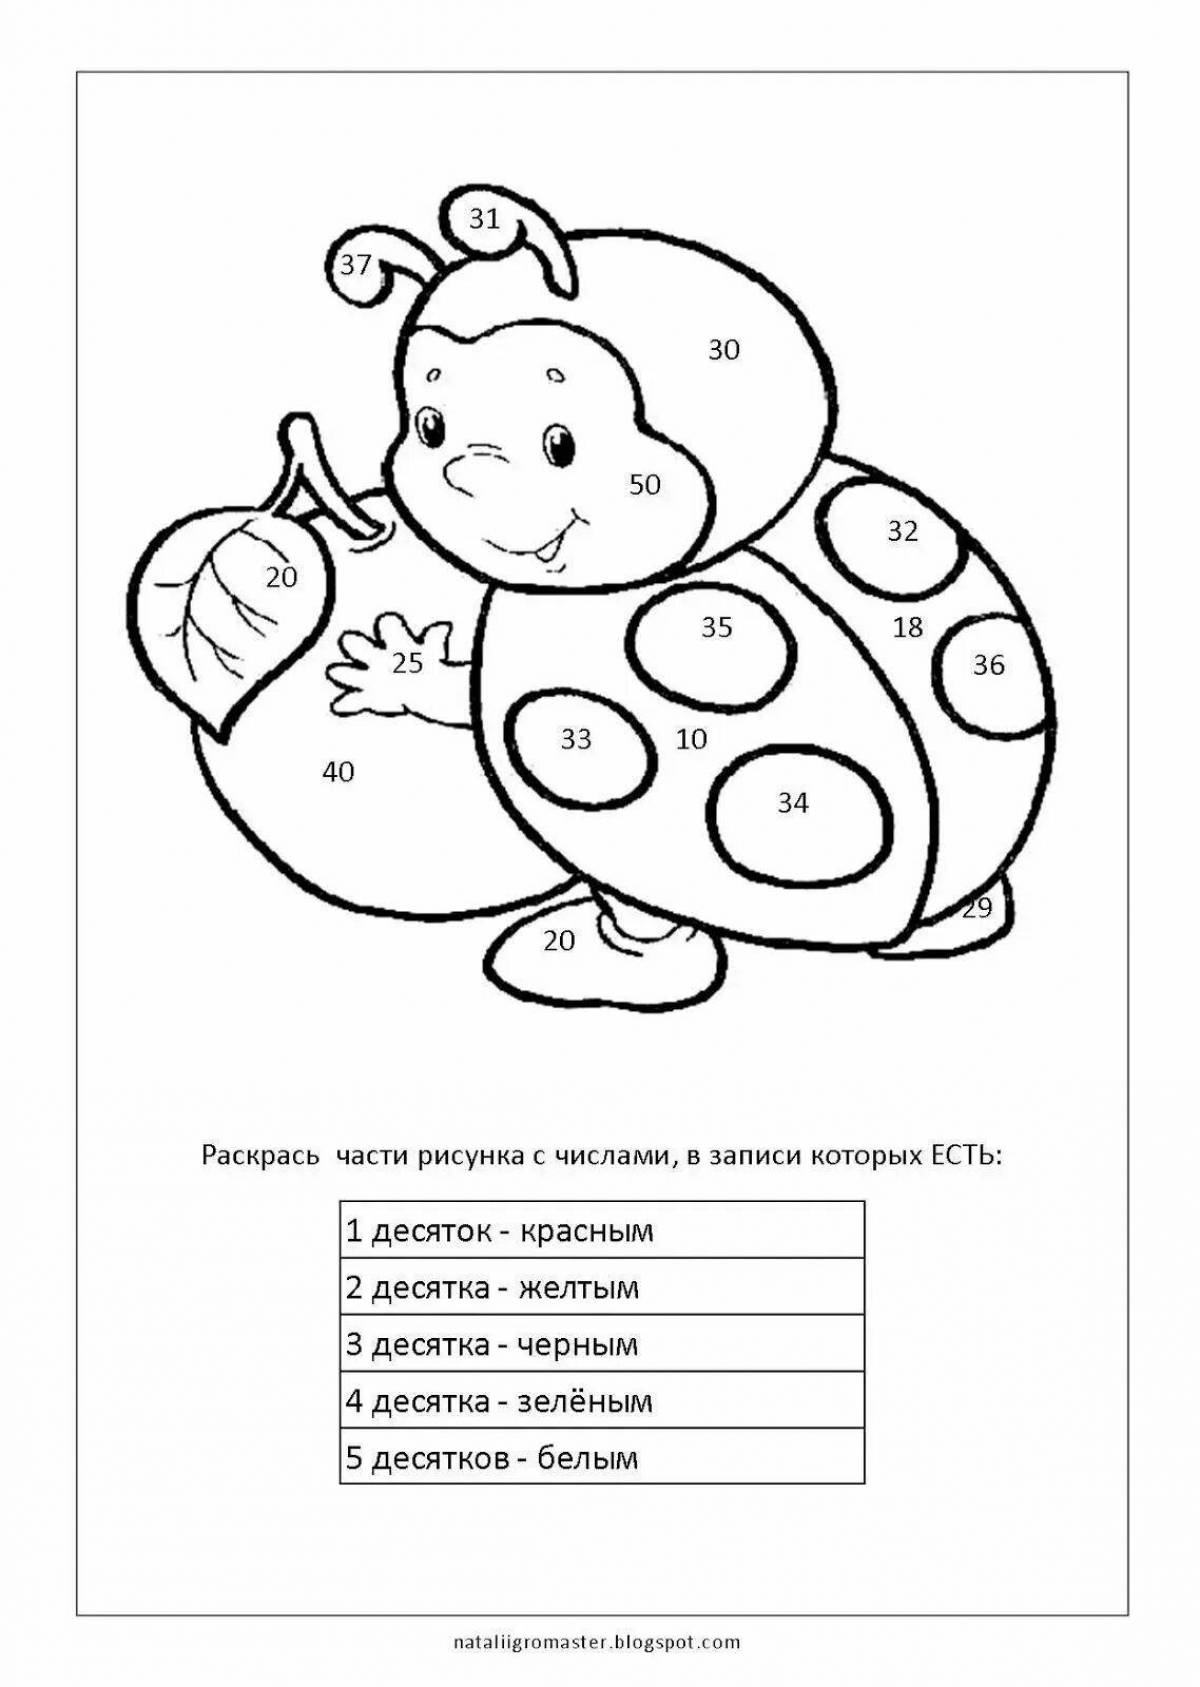 Colorful math coloring book for preschoolers